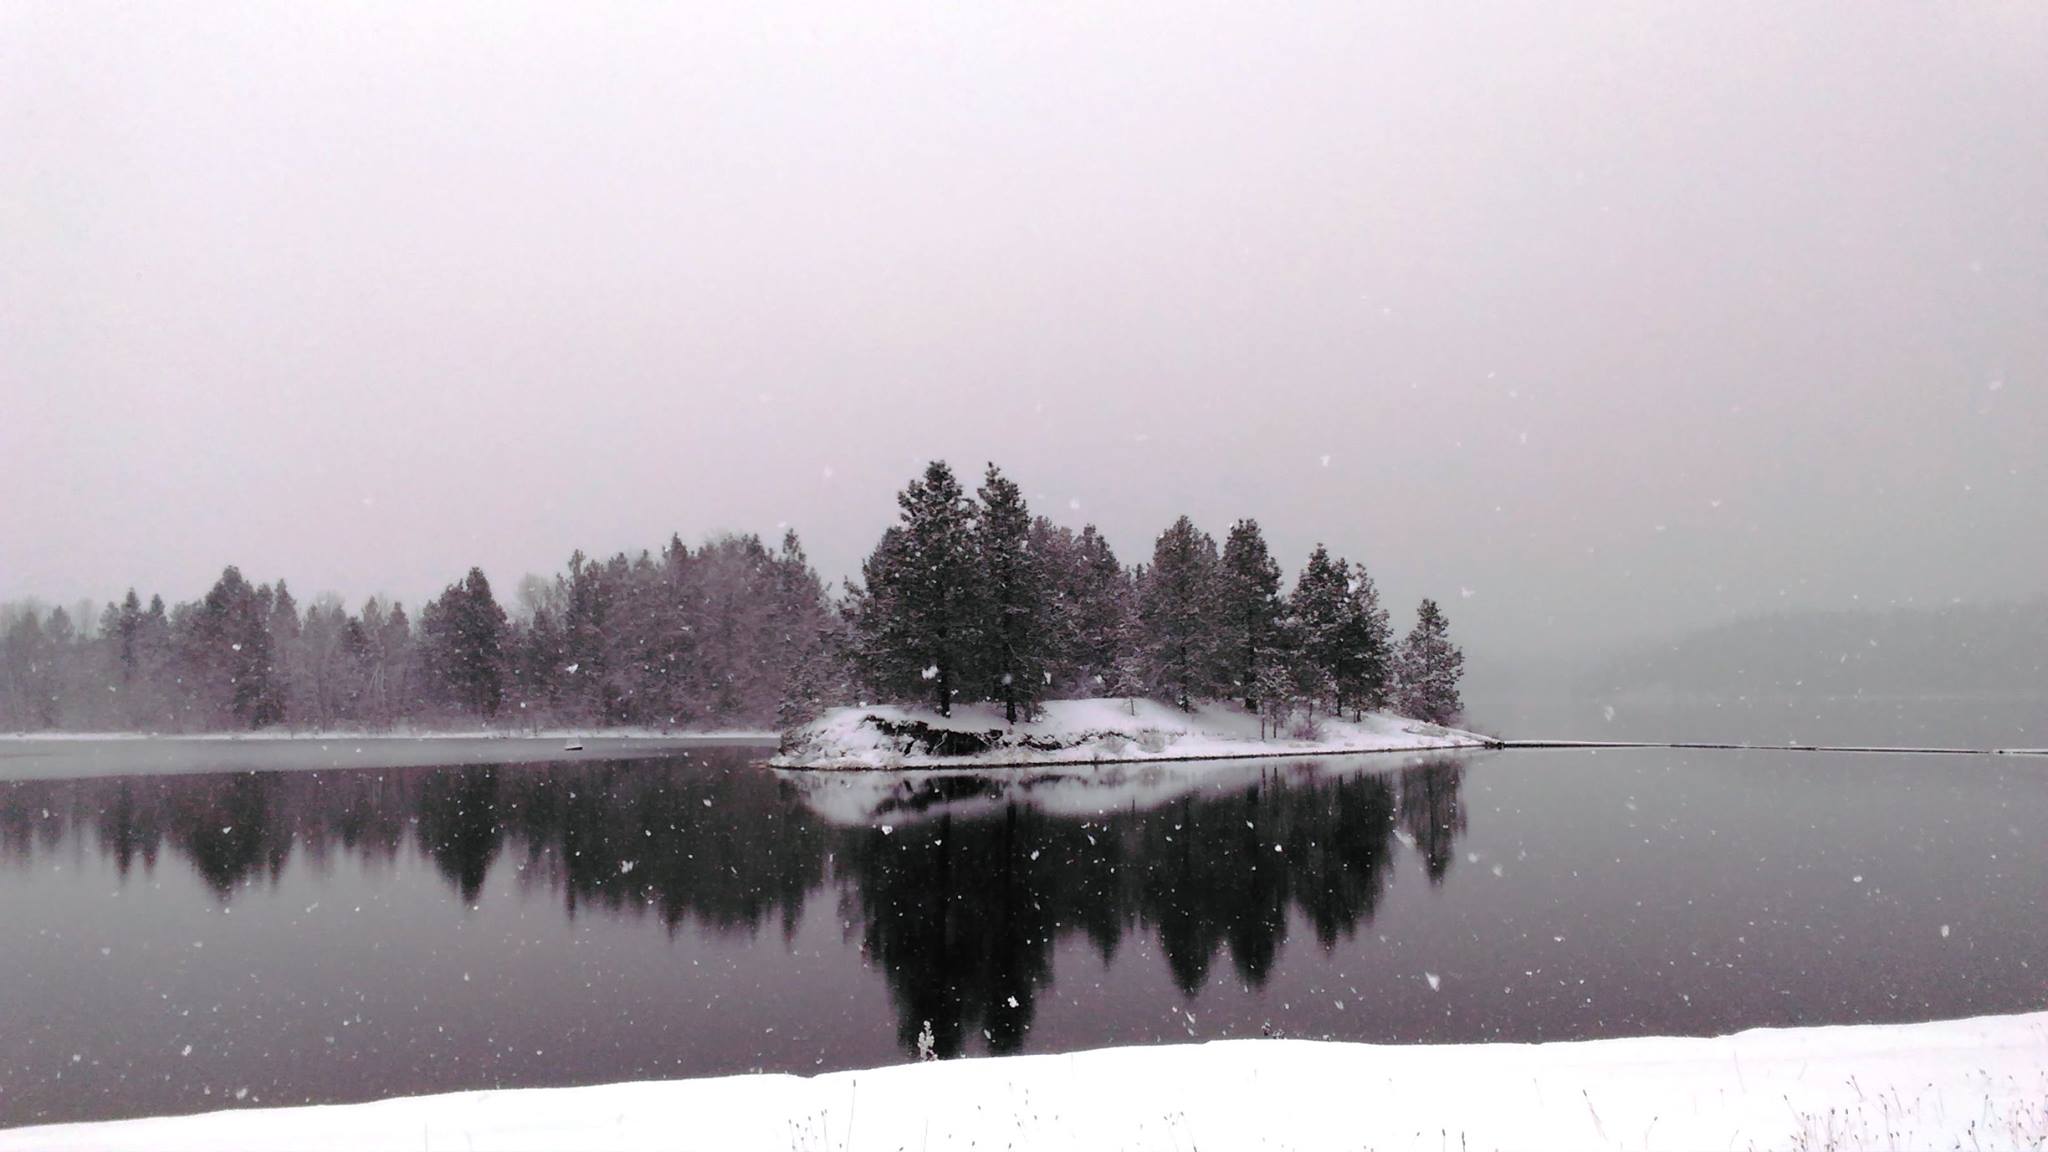 Snow falls over a small peninsula with its clear reflection over the waters.